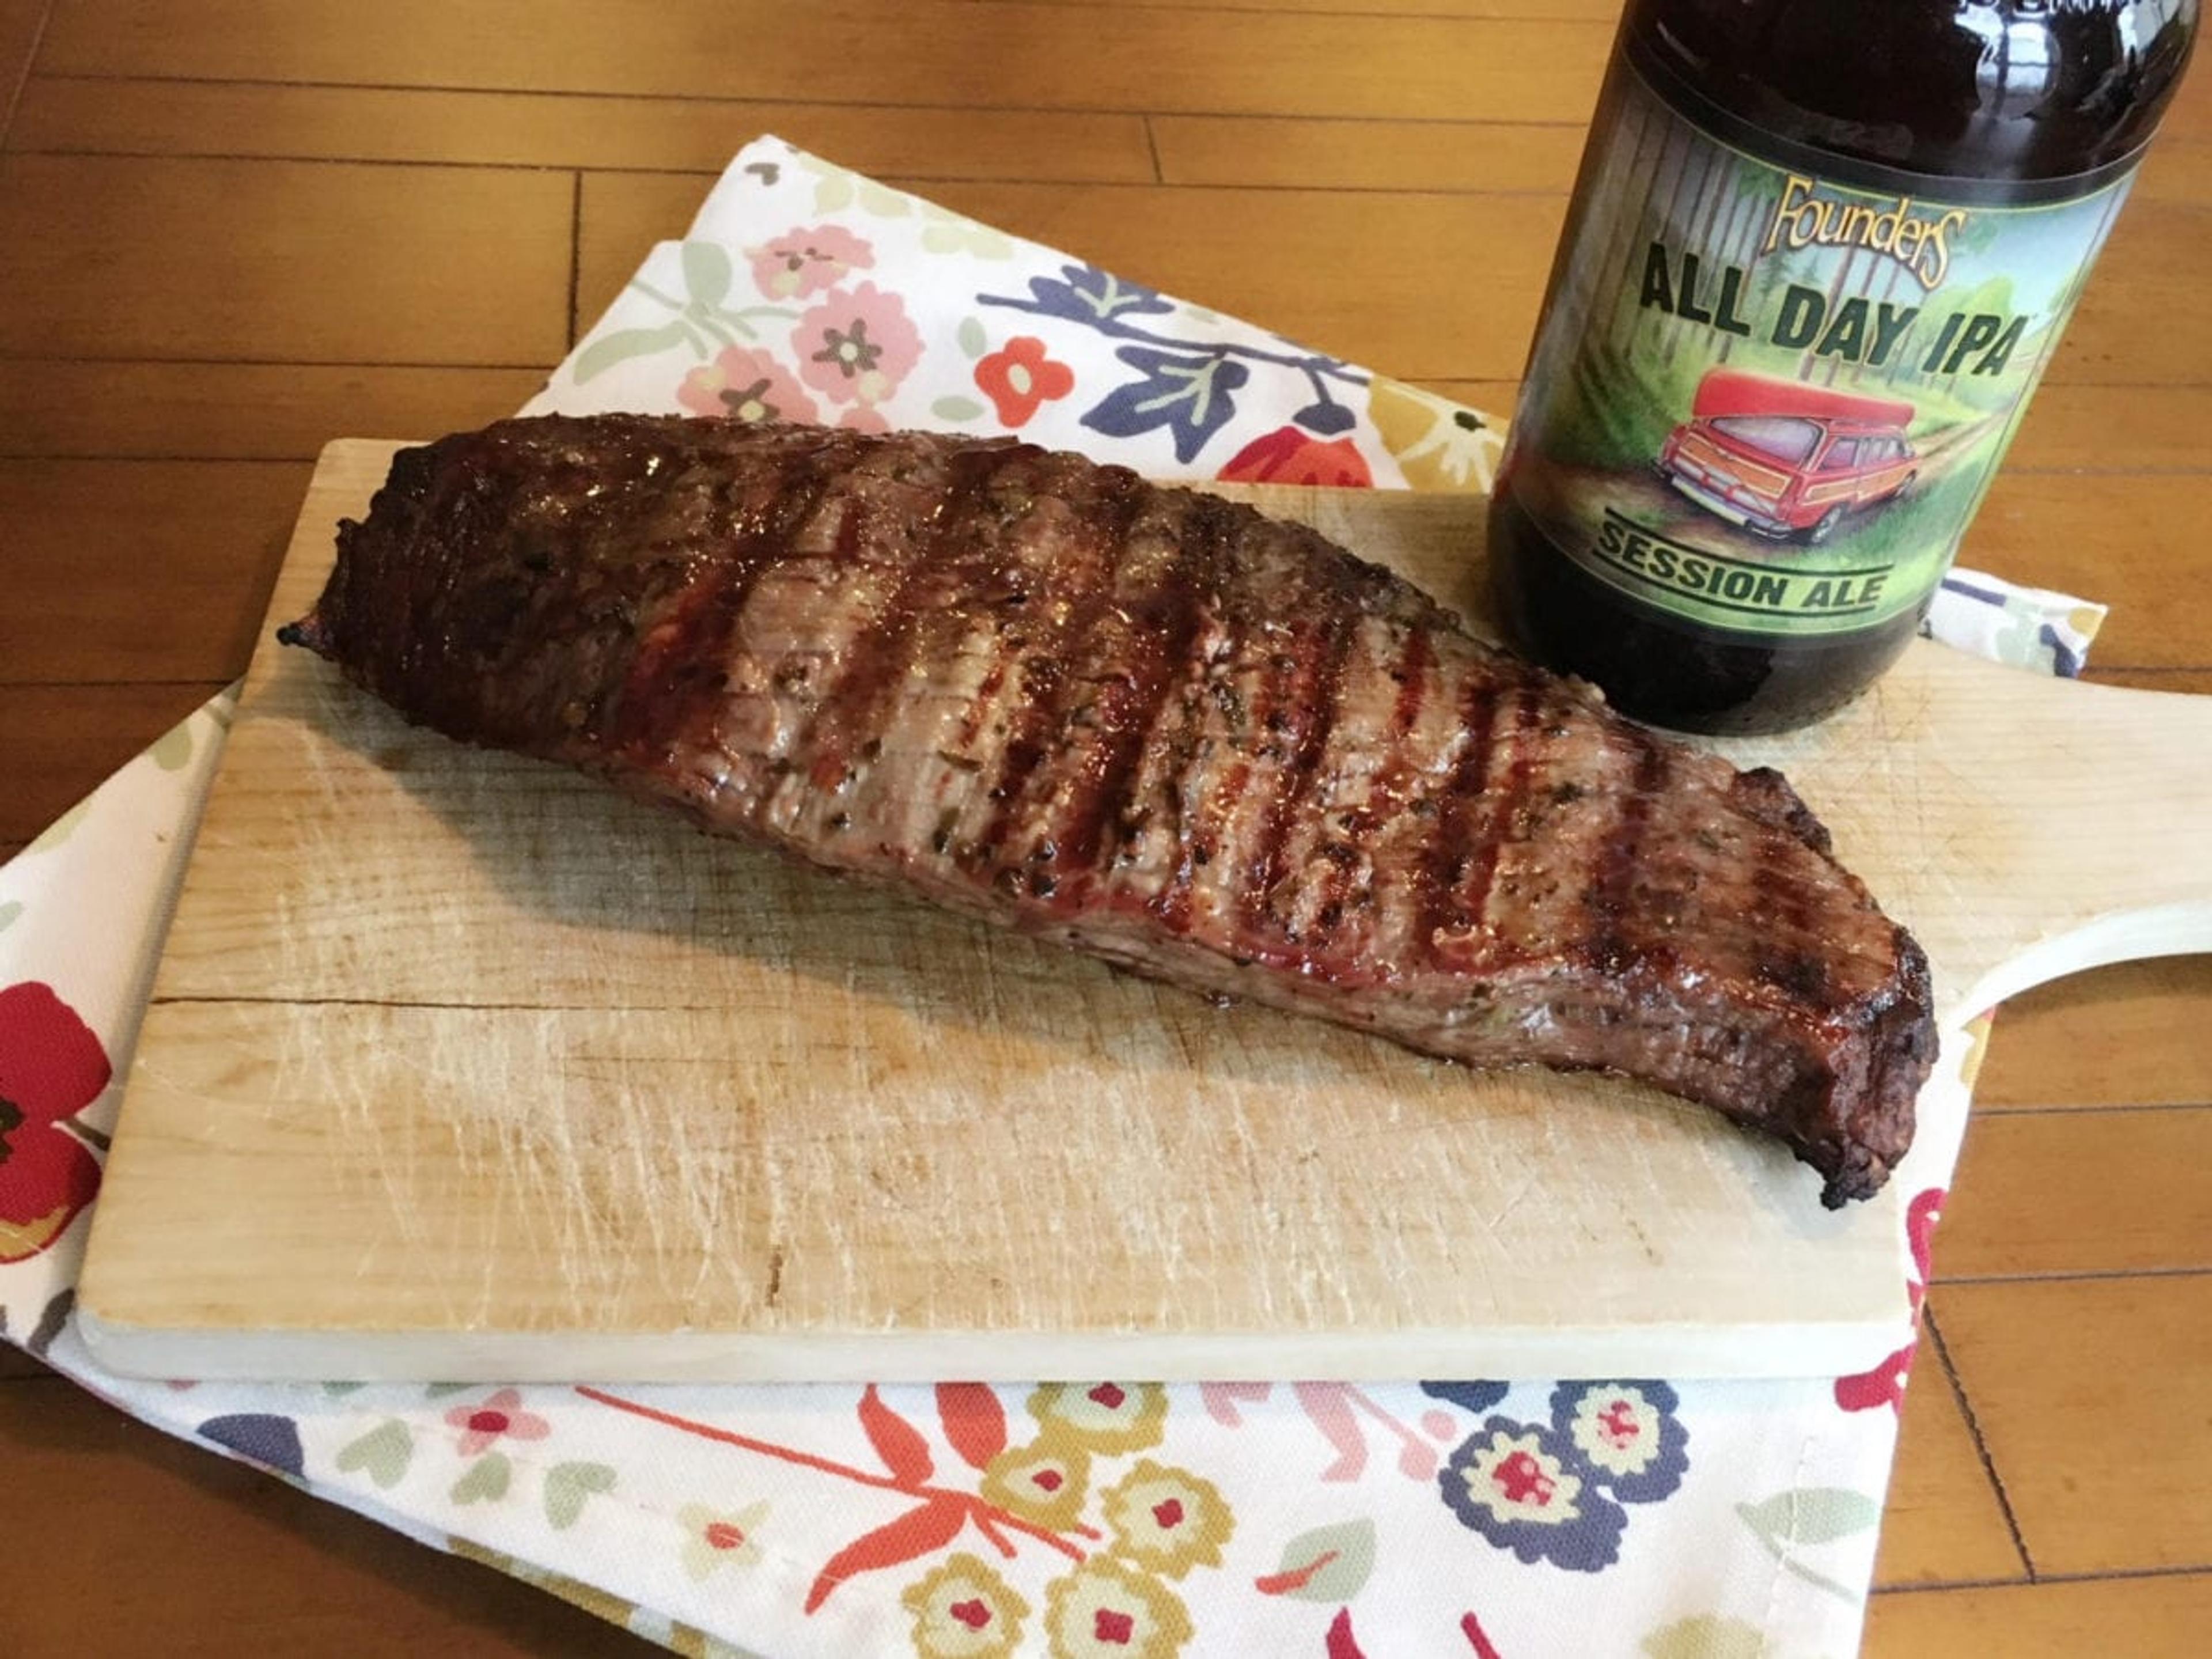 Founders All Day IPA Flank Steak Marinade